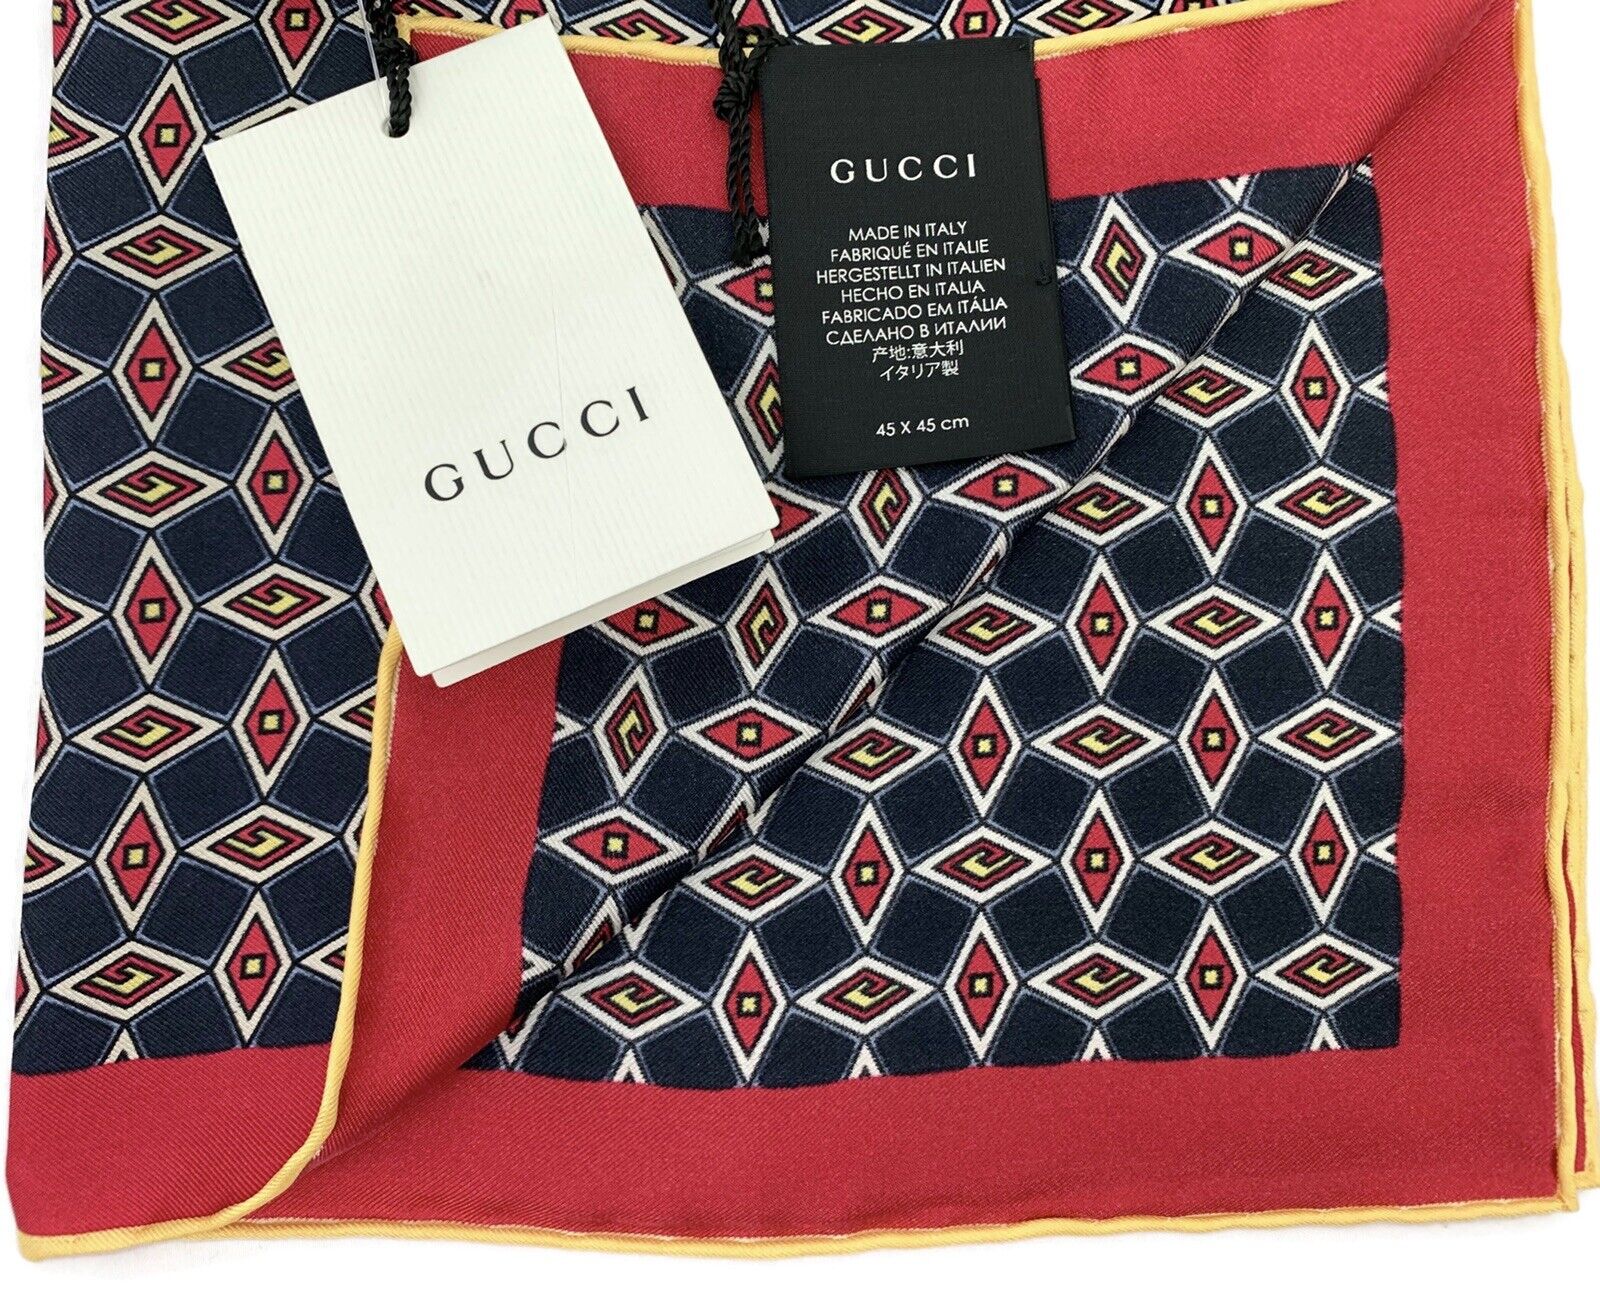 Gucci Silk Pocket Square w/ Tags - Black Pocket Squares, Suiting  Accessories - GUC1345893